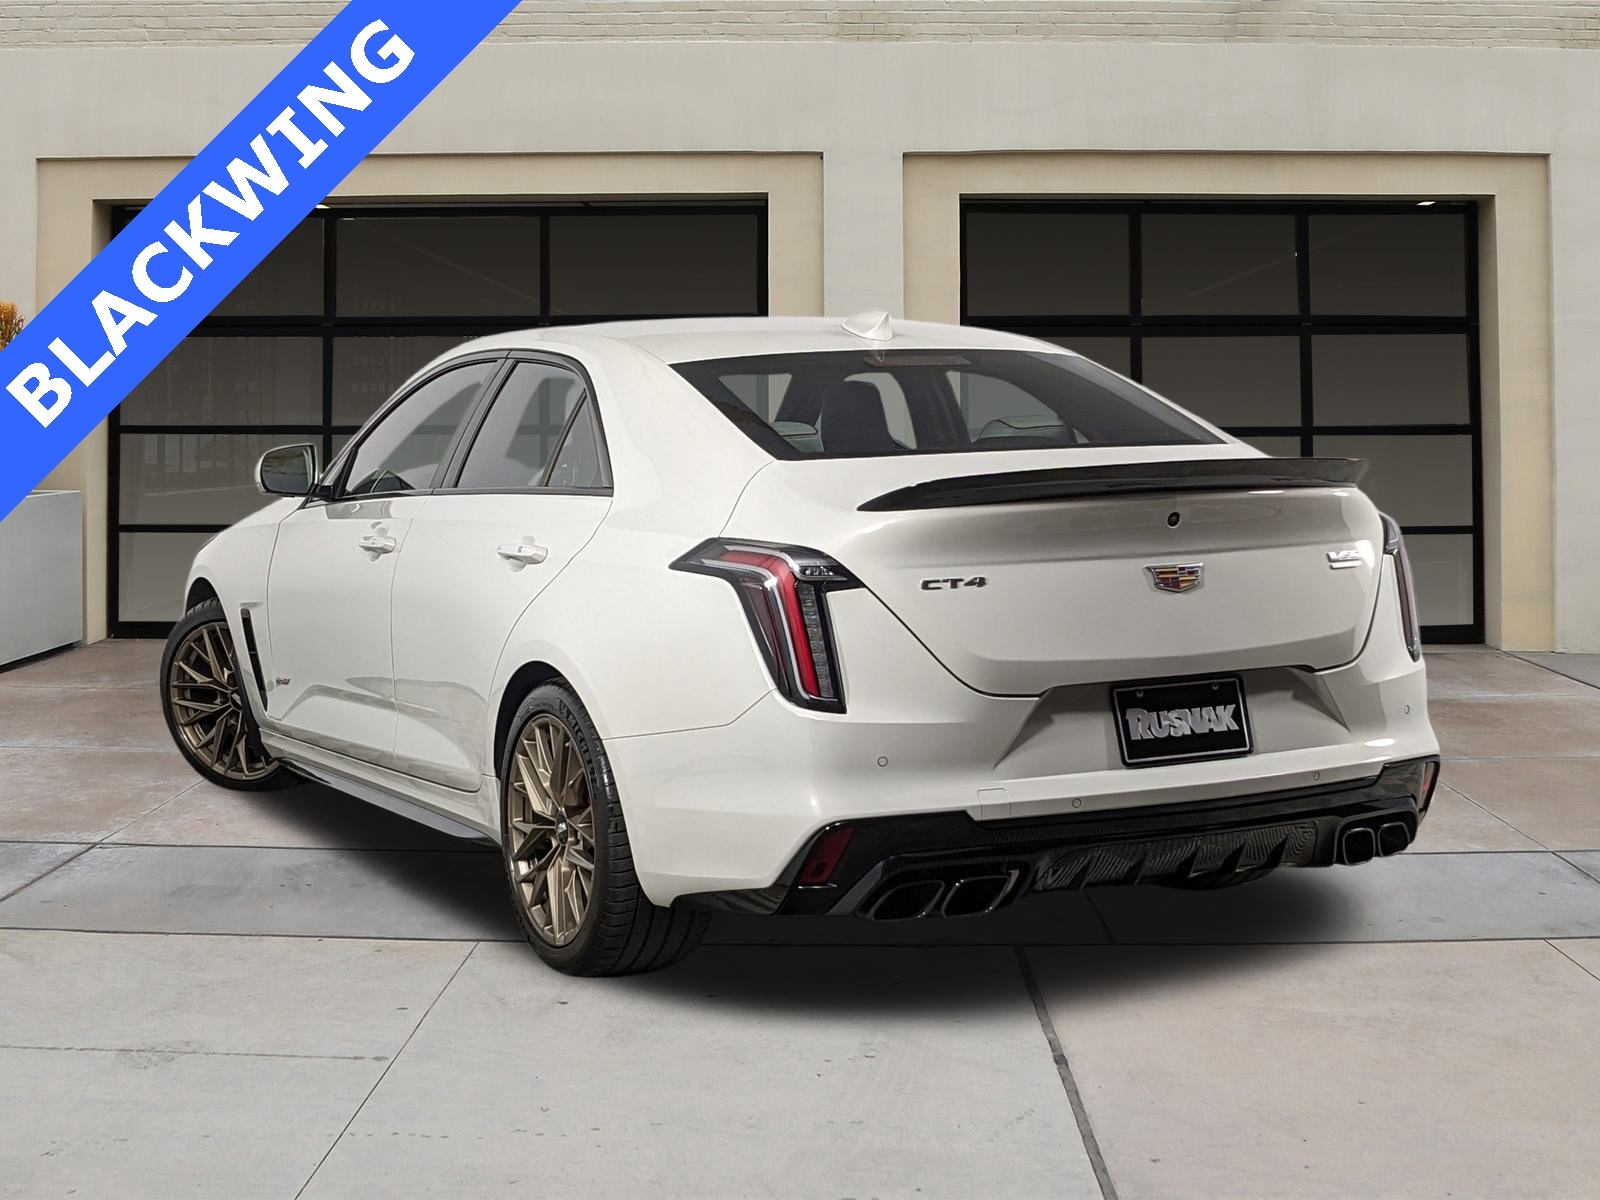 Used 2022 Cadillac CT4 V-Series Blackwing with VIN 1G6D75RP4N0410787 for sale in Pasadena, CA